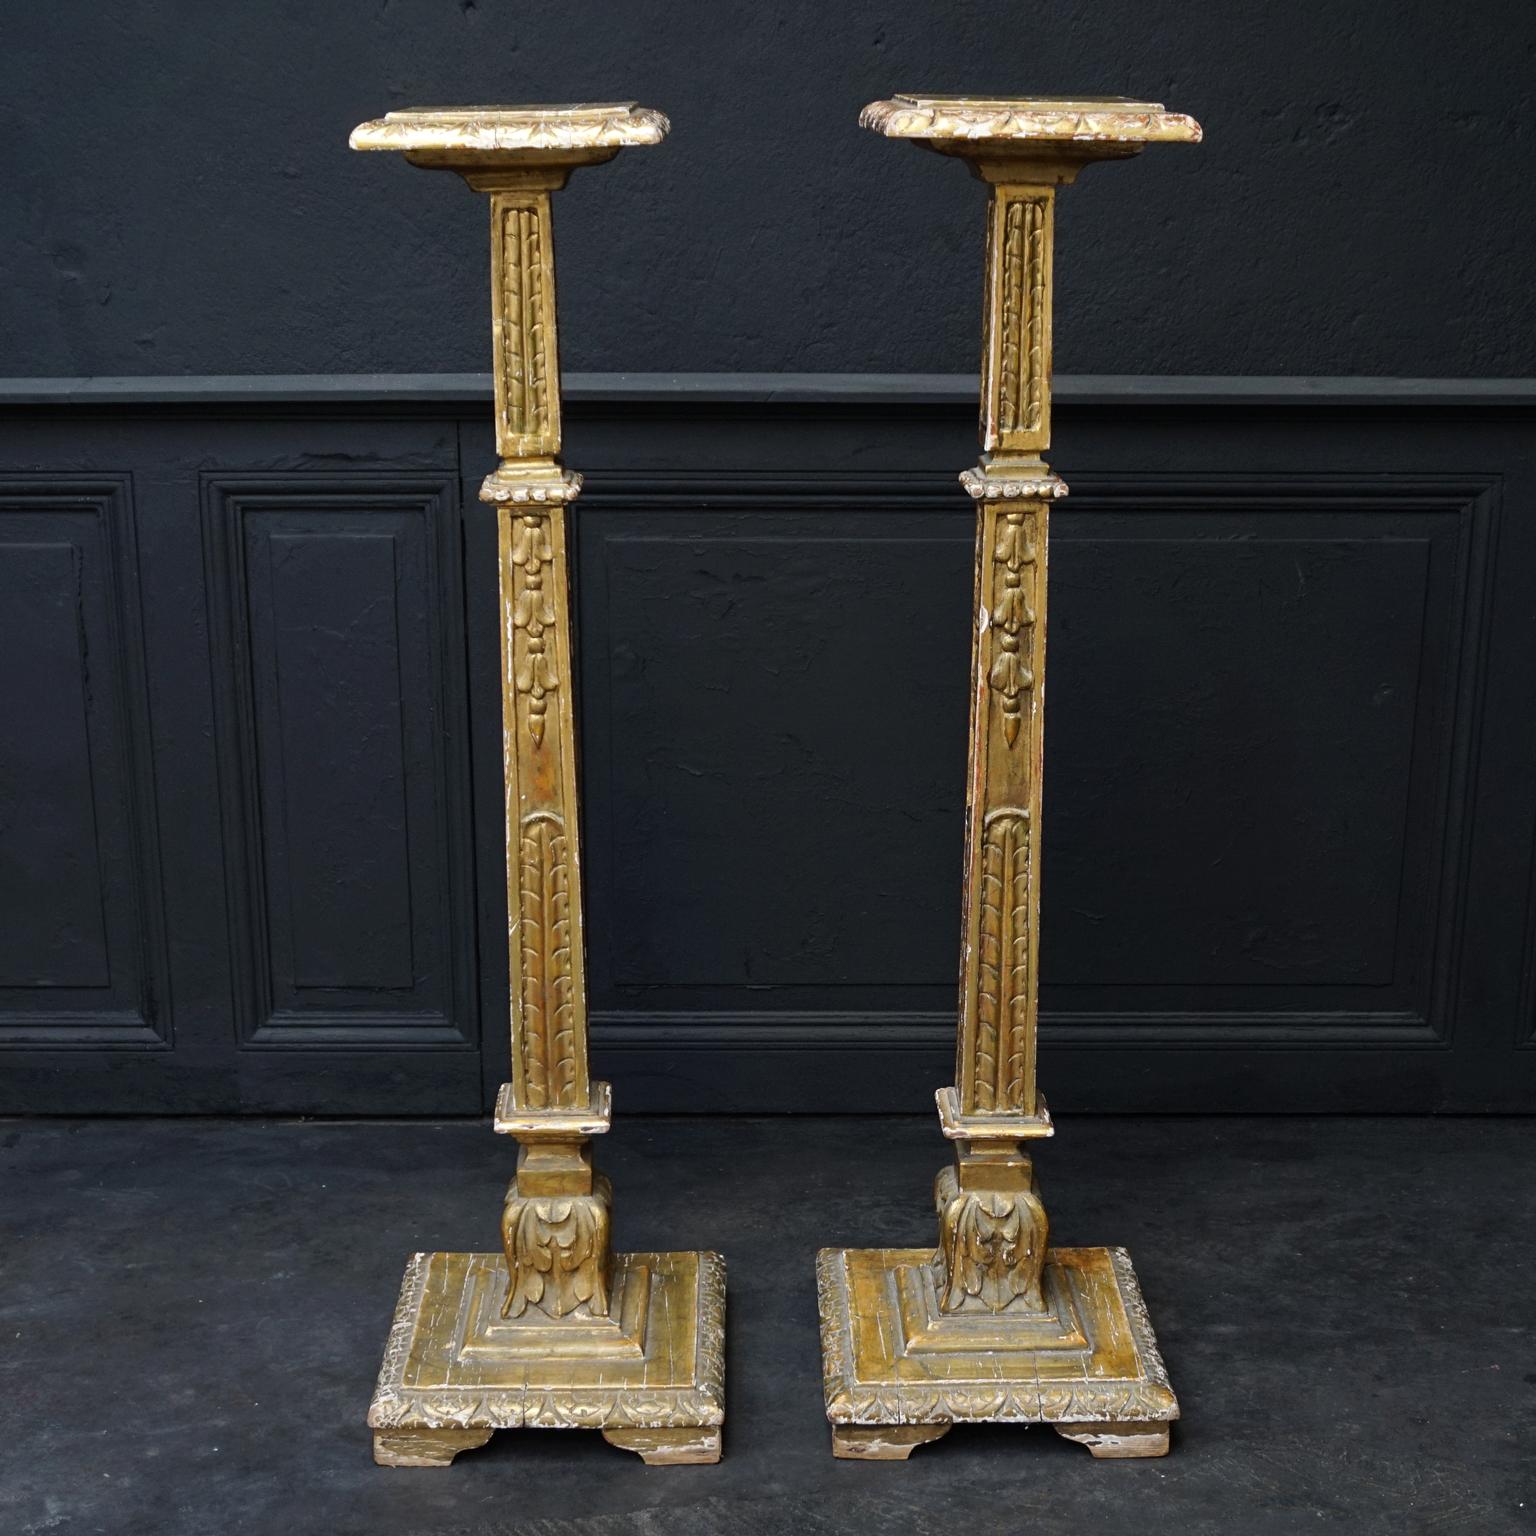 Beautifully distressed carved and gilded pedestals, worn with age which gives them great patina.
The palette of this pedestals, torcheres or display stands is gold in lots of bright gold layers, greenish and a bit of dark red.

This is truly a